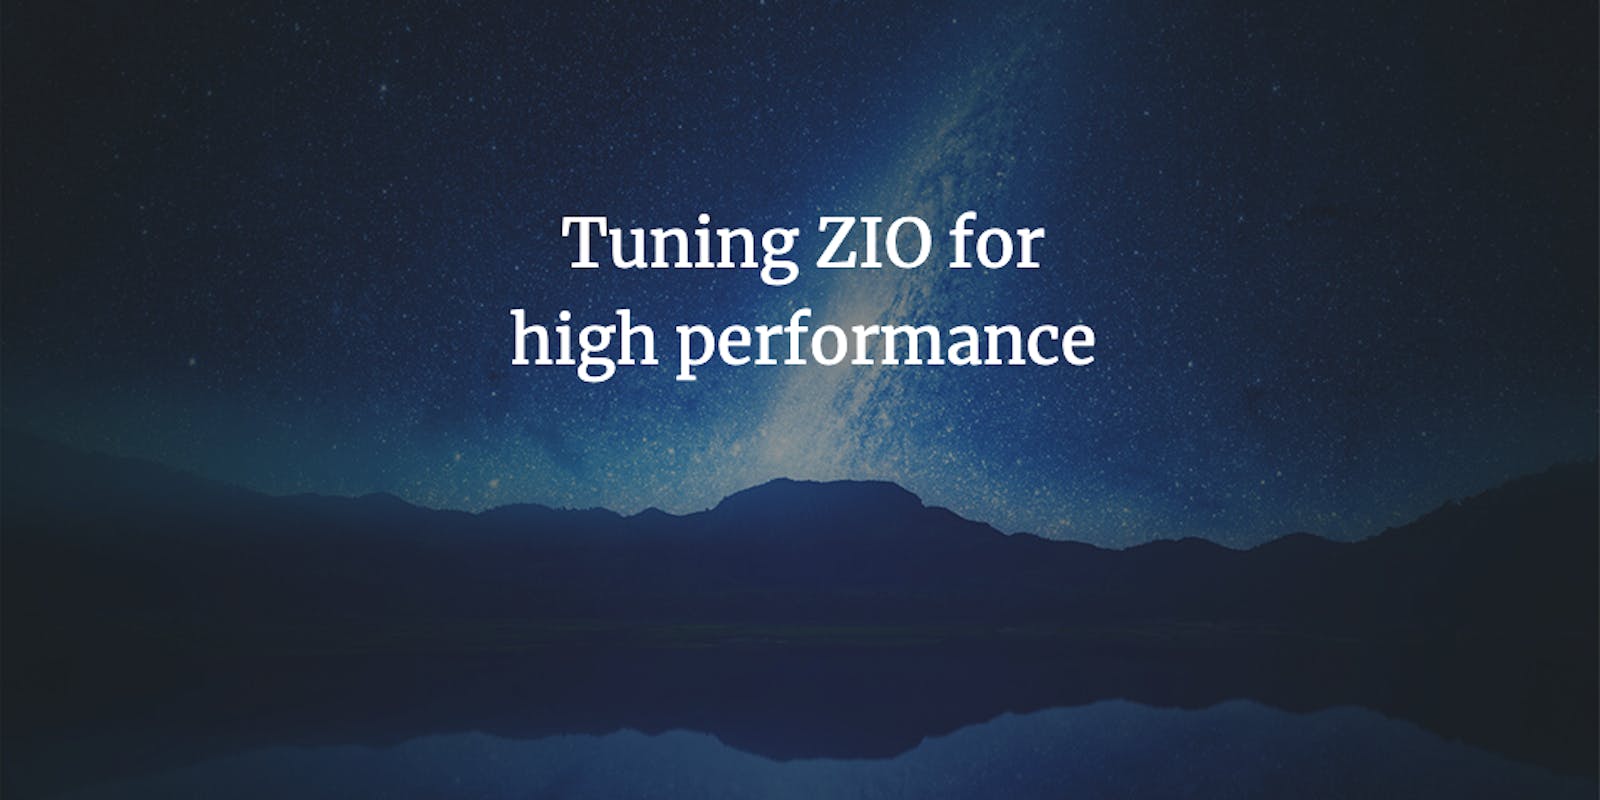 Tuning ZIO for high performance